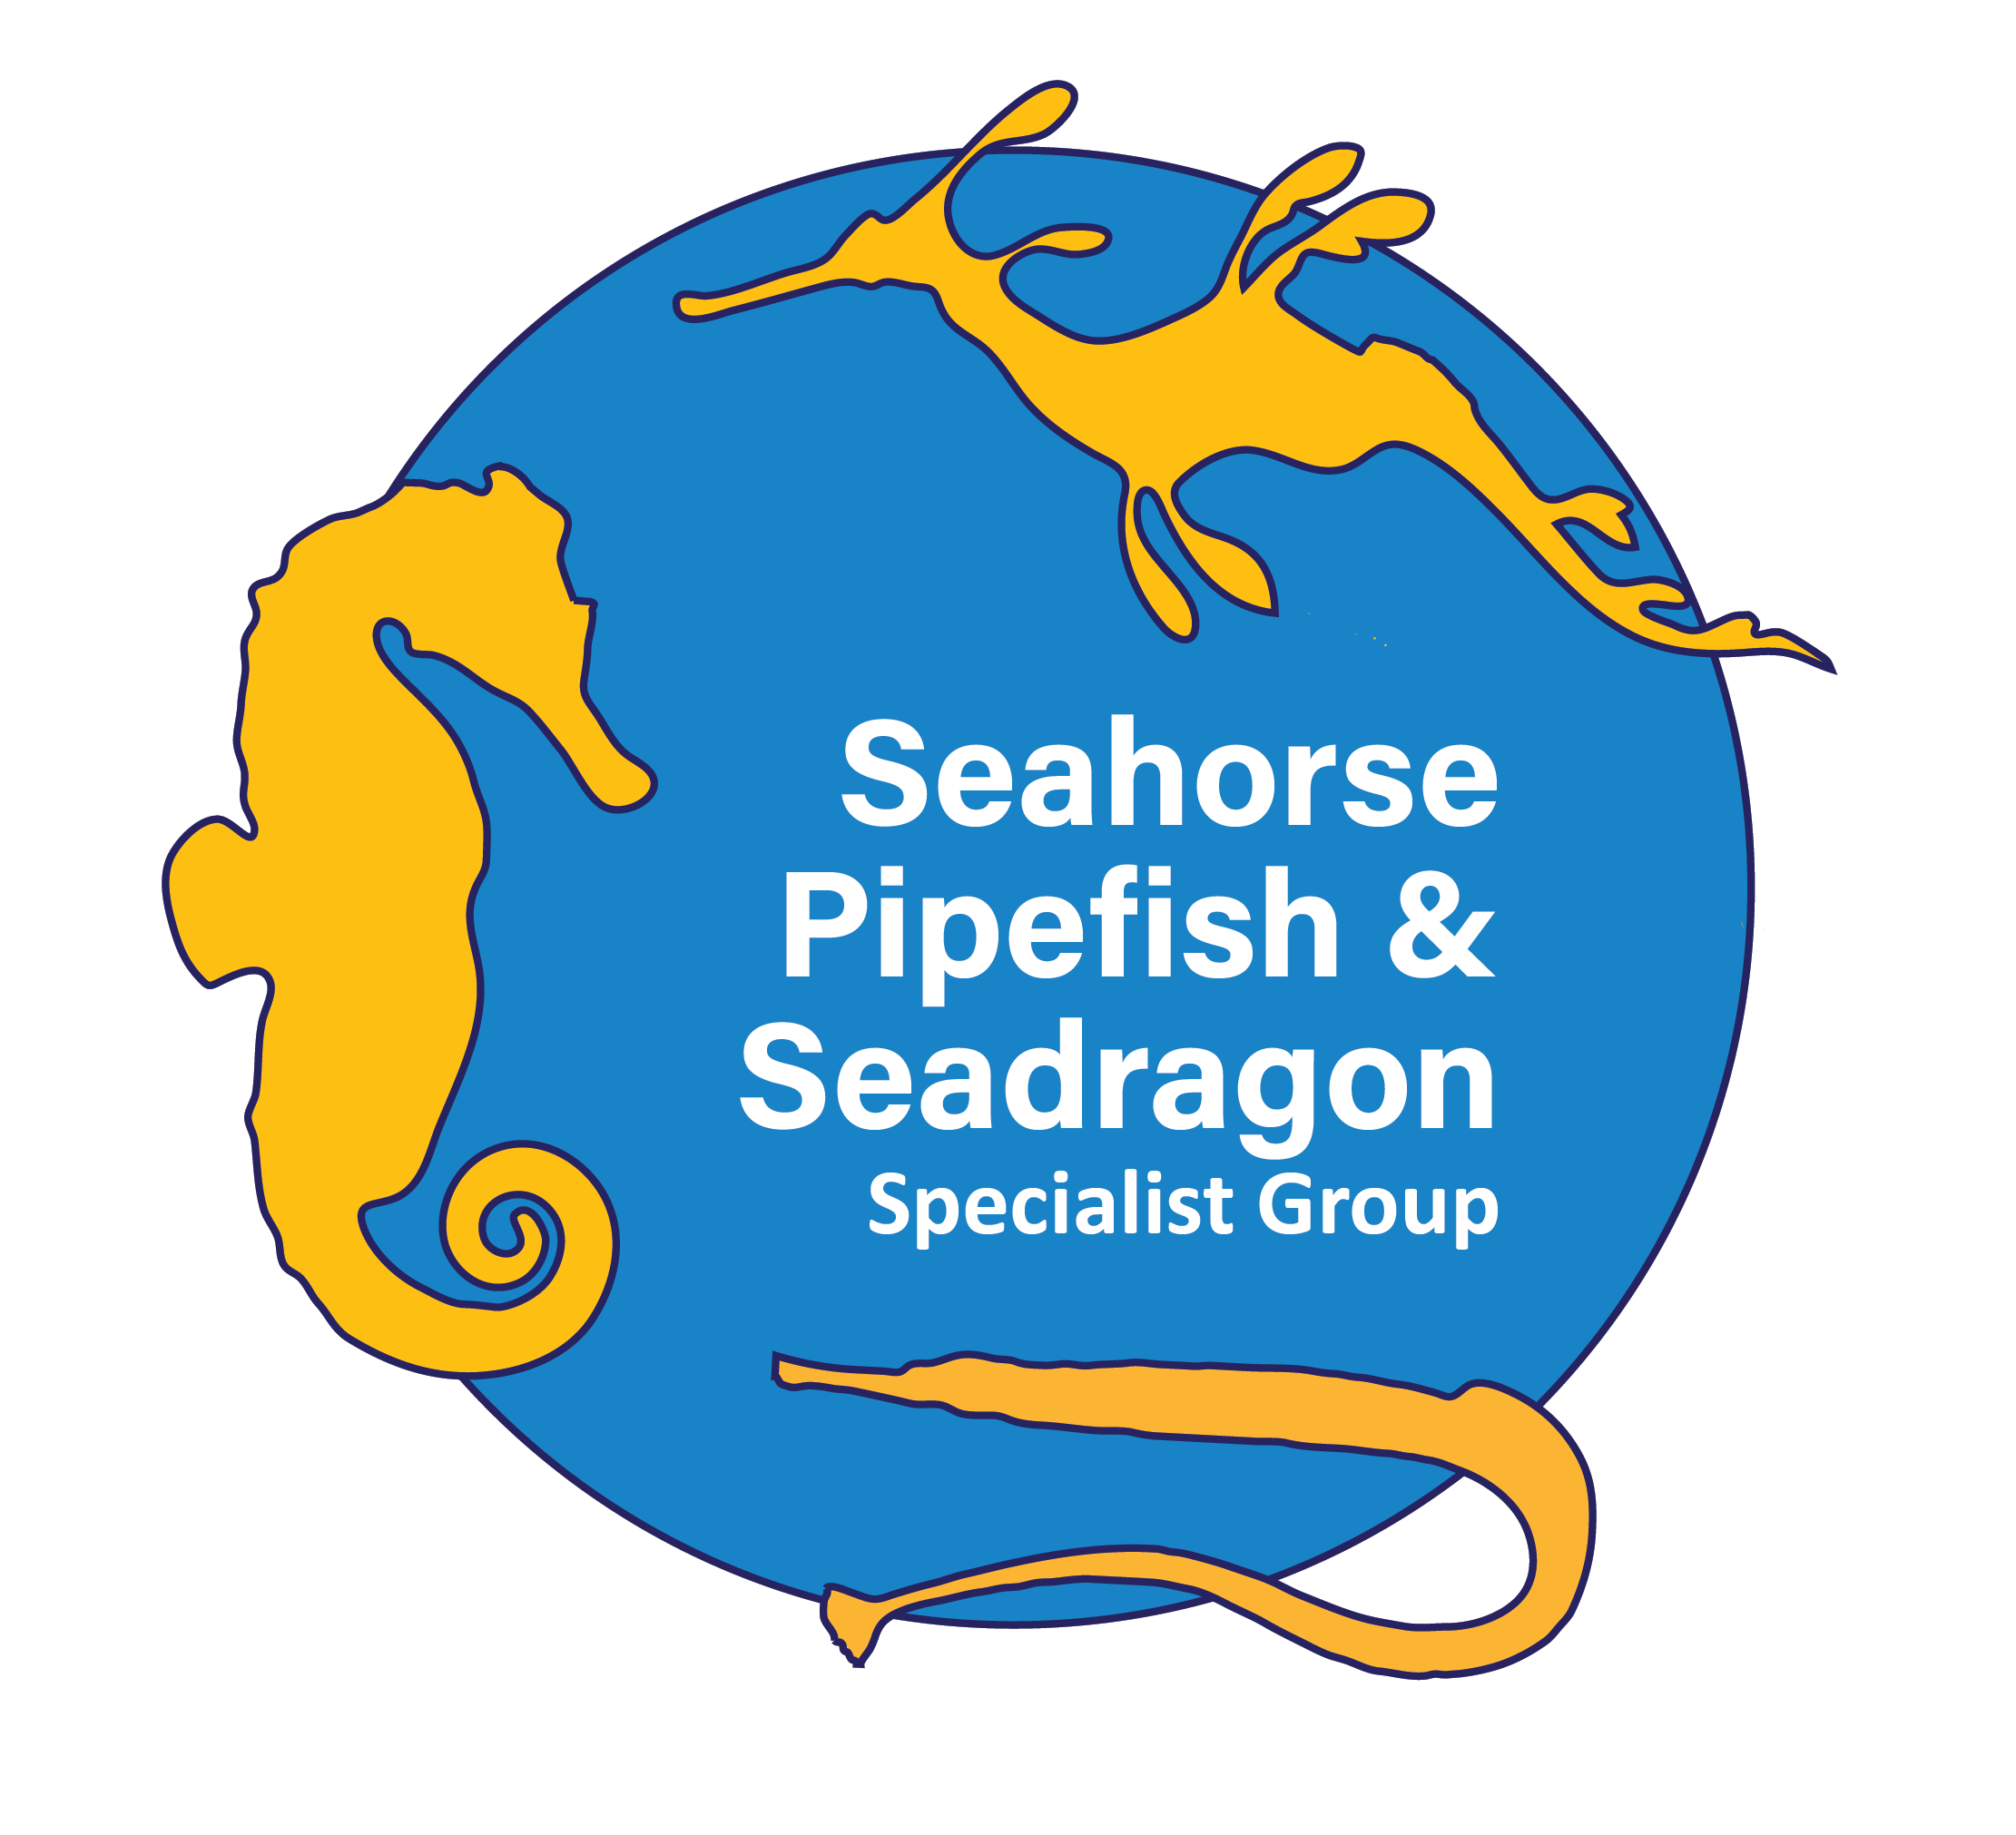 newIUCNseahorse logo - square.png